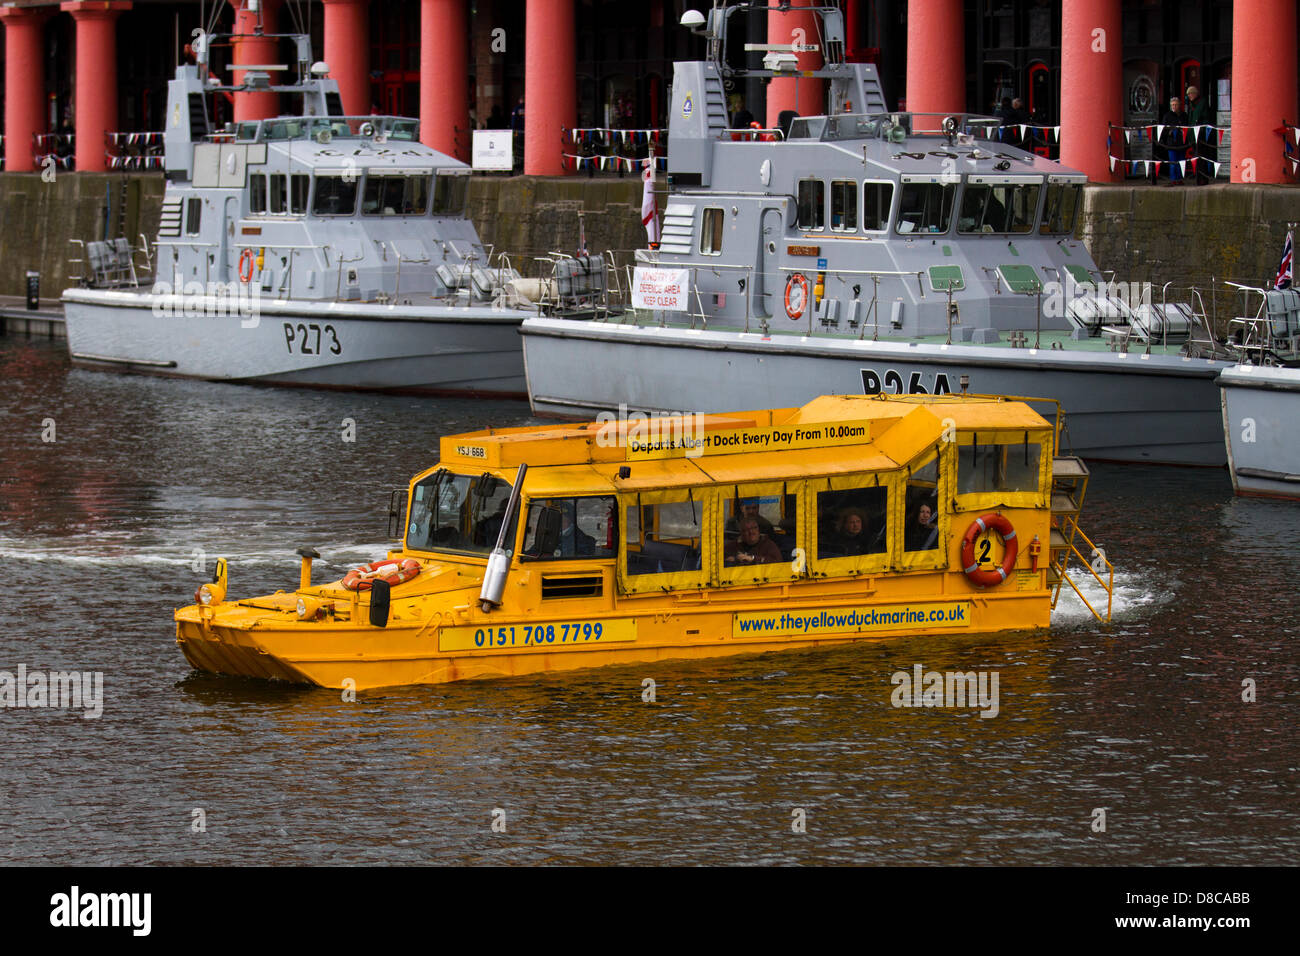 DUKW (colloquially known as Duck) is a six-wheel-drive amphibious modification of the 2+1⁄2-ton CCKW trucks in Liverpool, UK 24th May, 2013. Liverpool's iconic Yellow Duckmarine and Royal Navy Patrol Boats in Albert Dock at the 70th anniversary of the Battle of the Atlantic (BOA 70)  commemoration and events centred around Liverpool. The Battle of the Atlantic was the longest continuous military campaign in World War 2, at its height from mid-1940 through to the end of 1943. Stock Photo